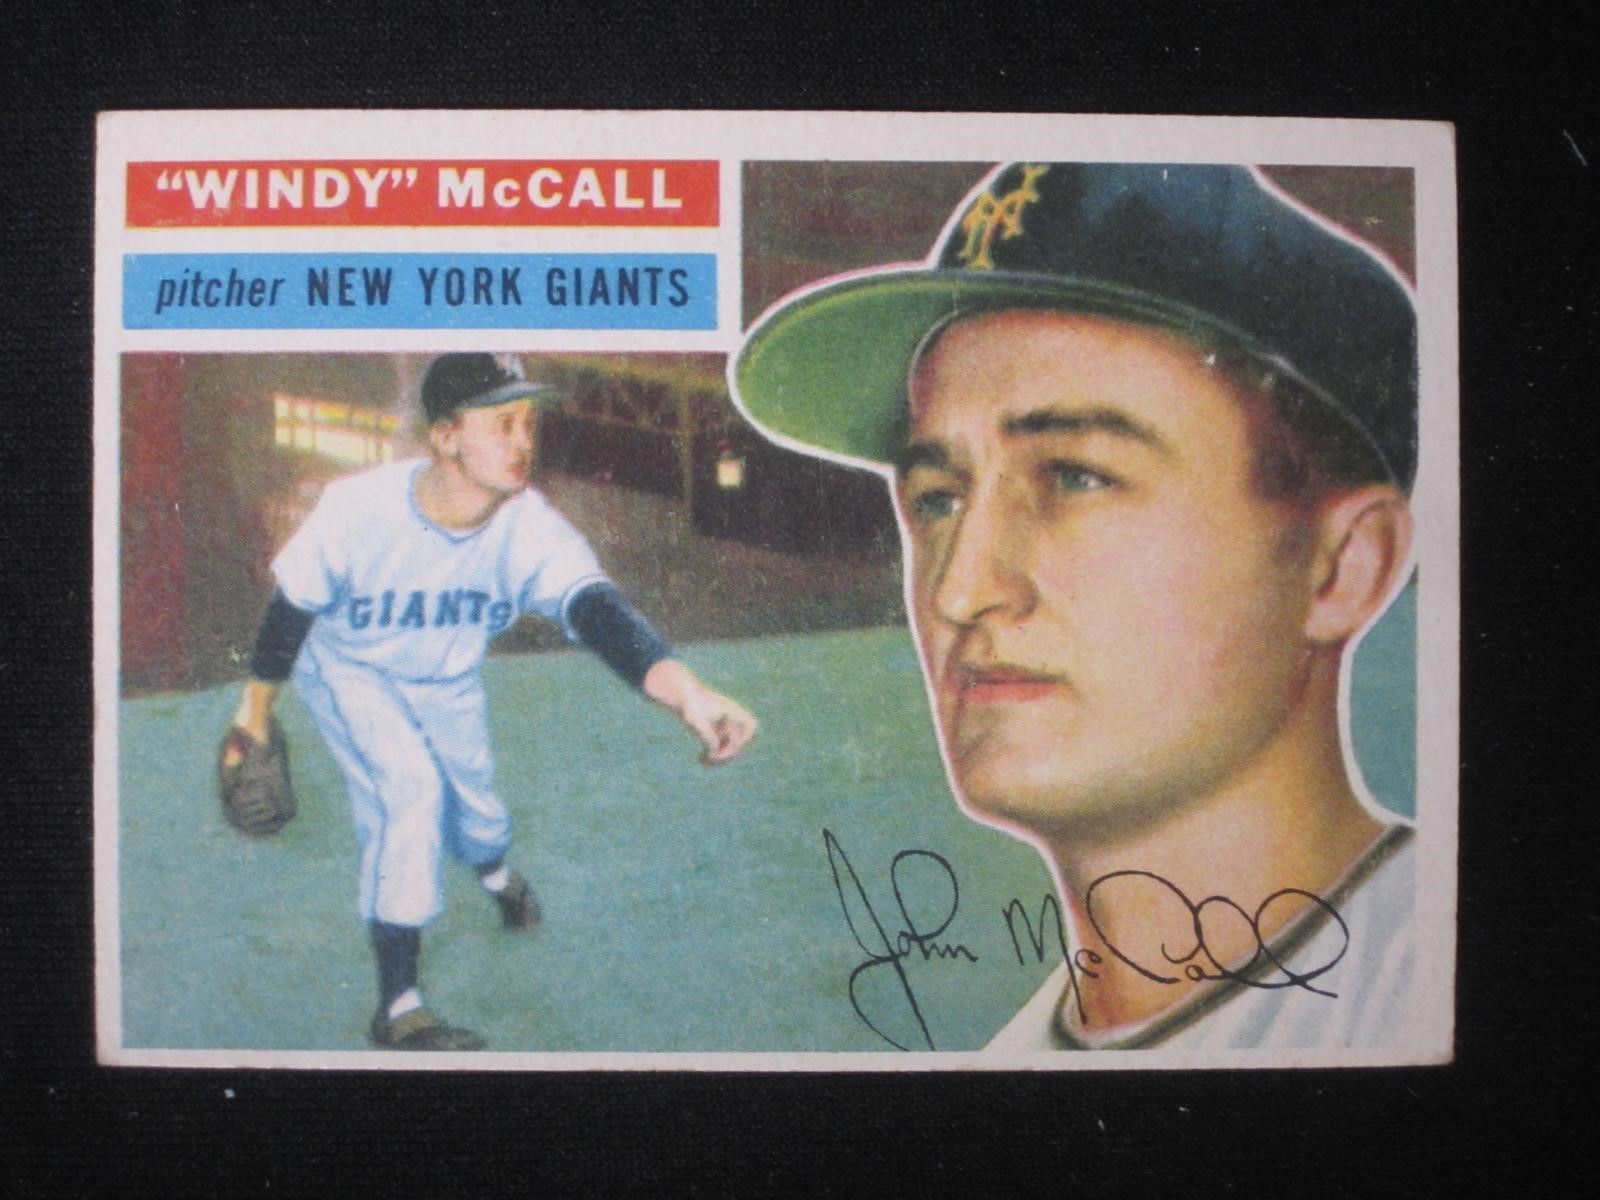 1956 TOPPS #44 WINDY MCCALL GIANTS VINTAGE